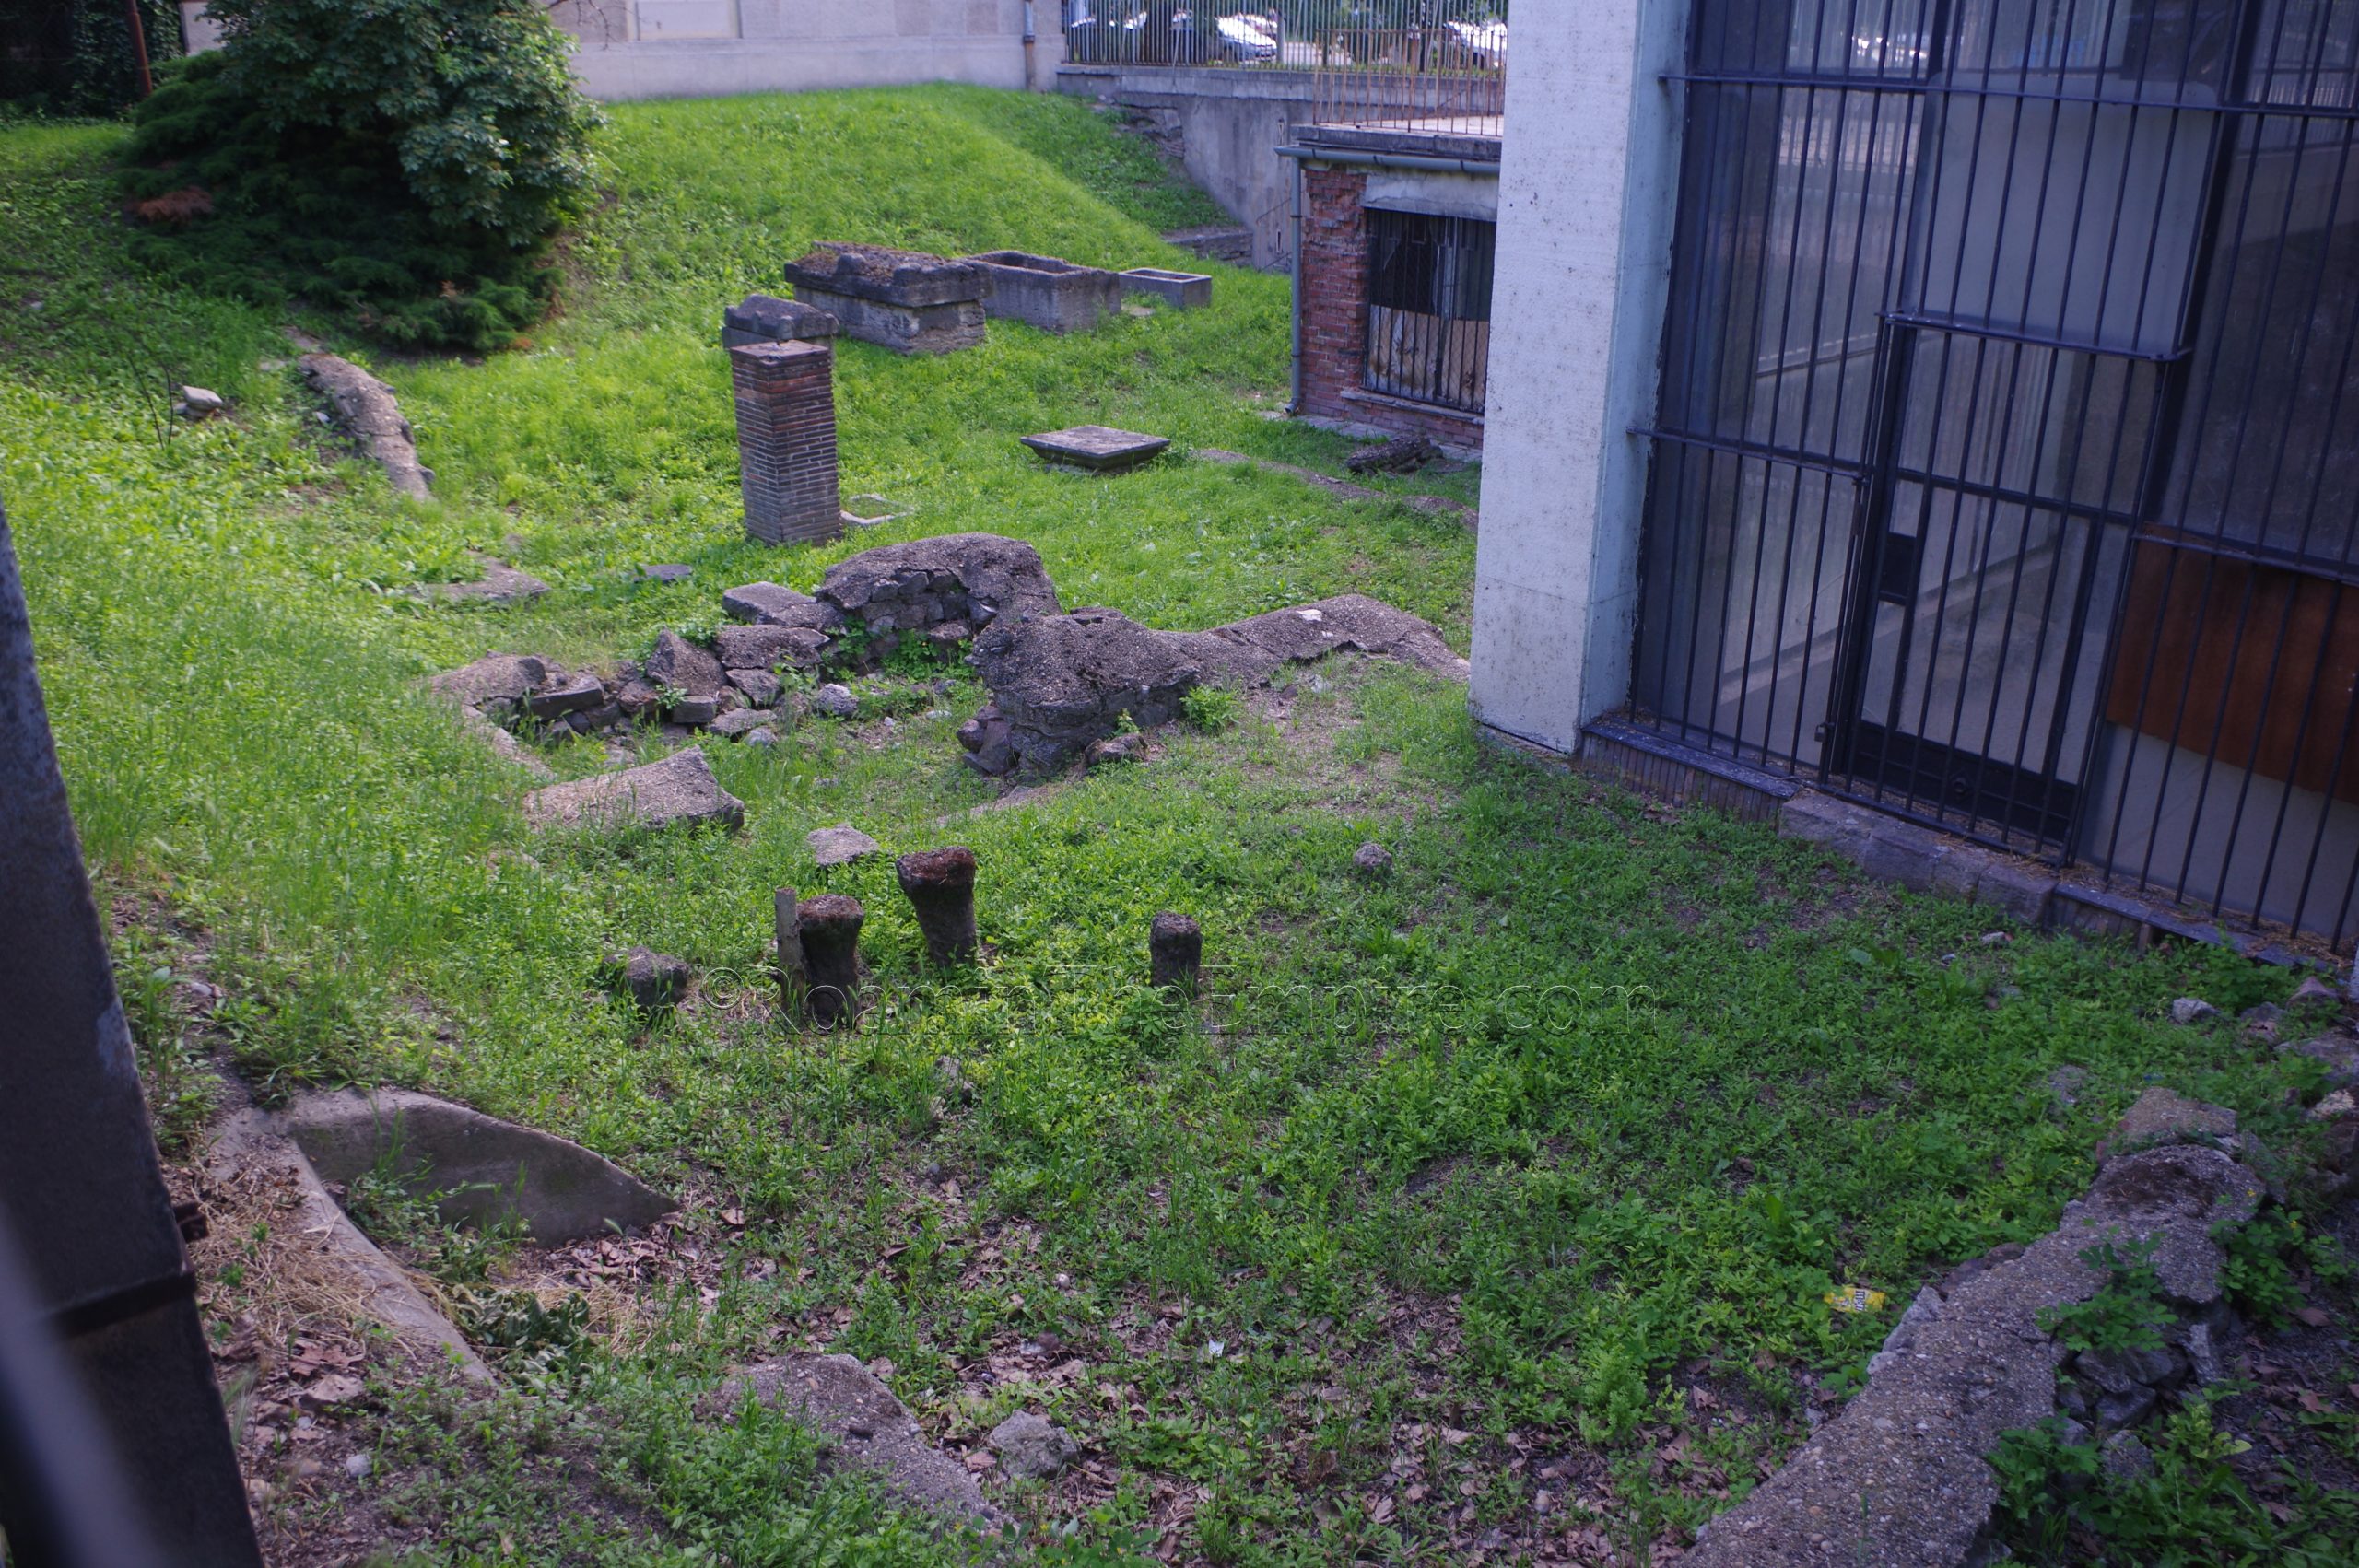 Remains of a residence visible behind the Táborvárosi Múzeum.